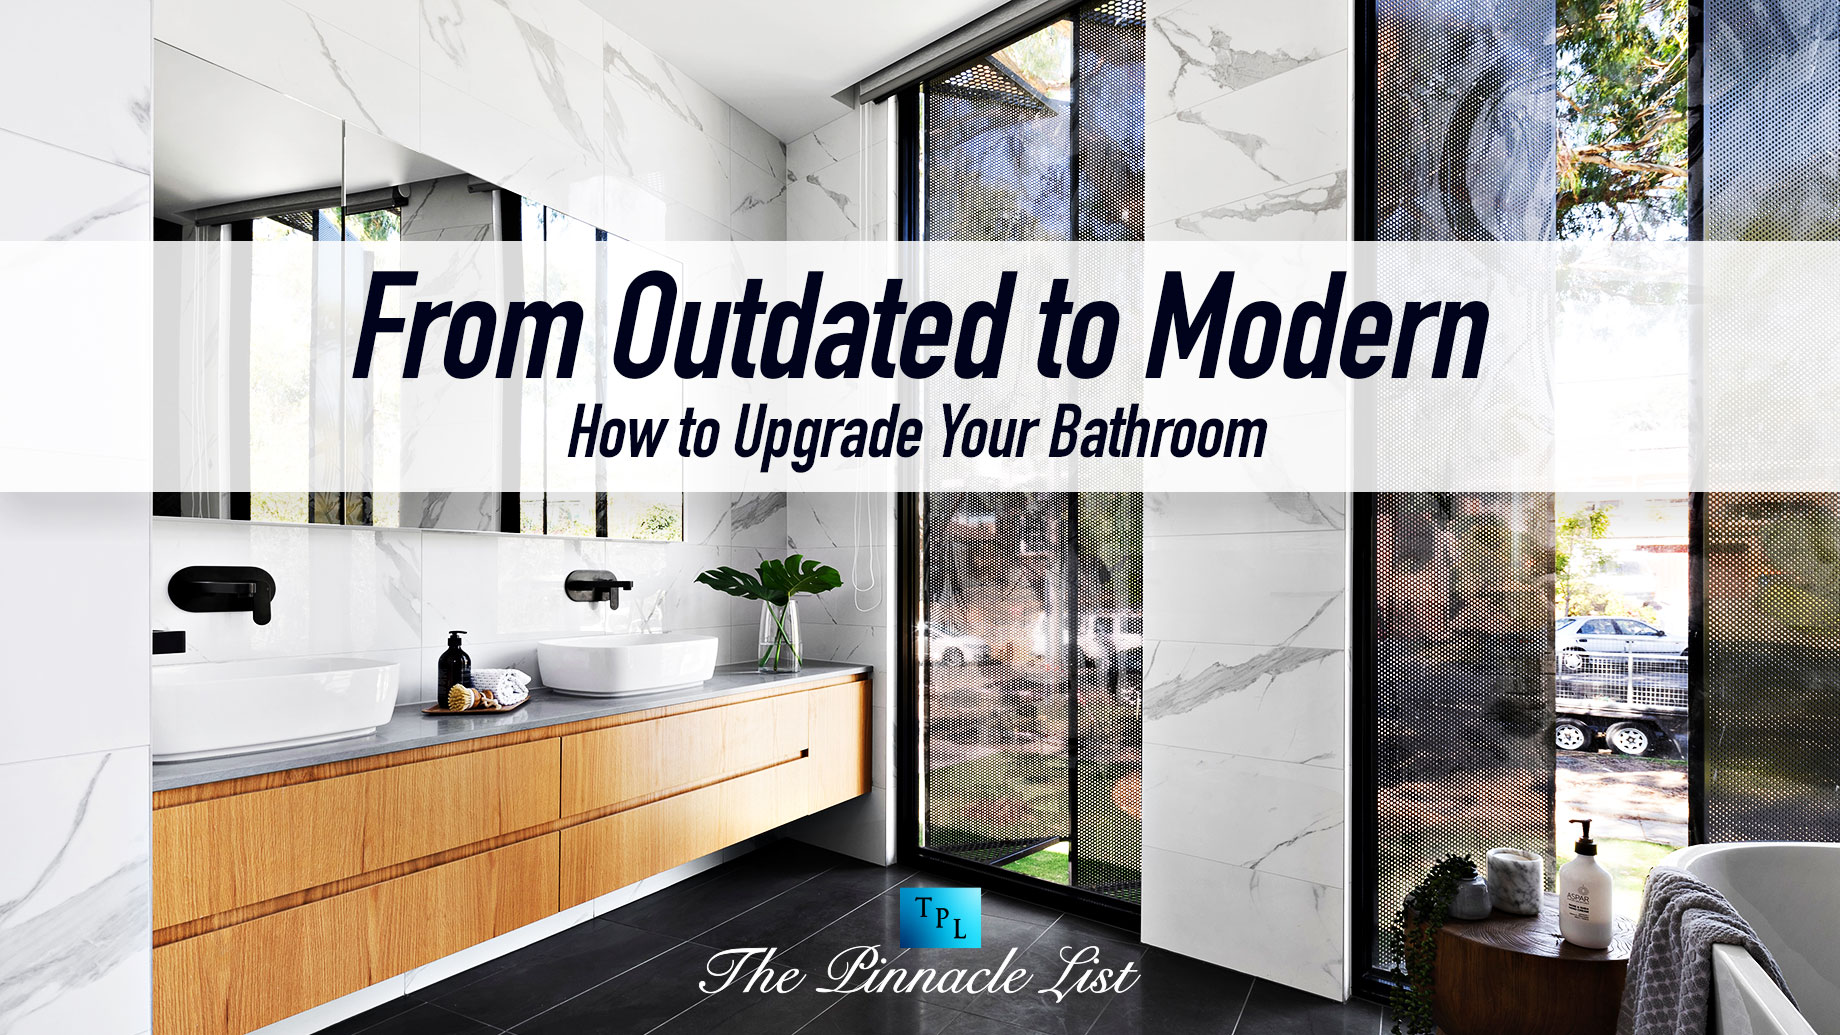 From Outdated to Modern: How to Upgrade Your Bathroom